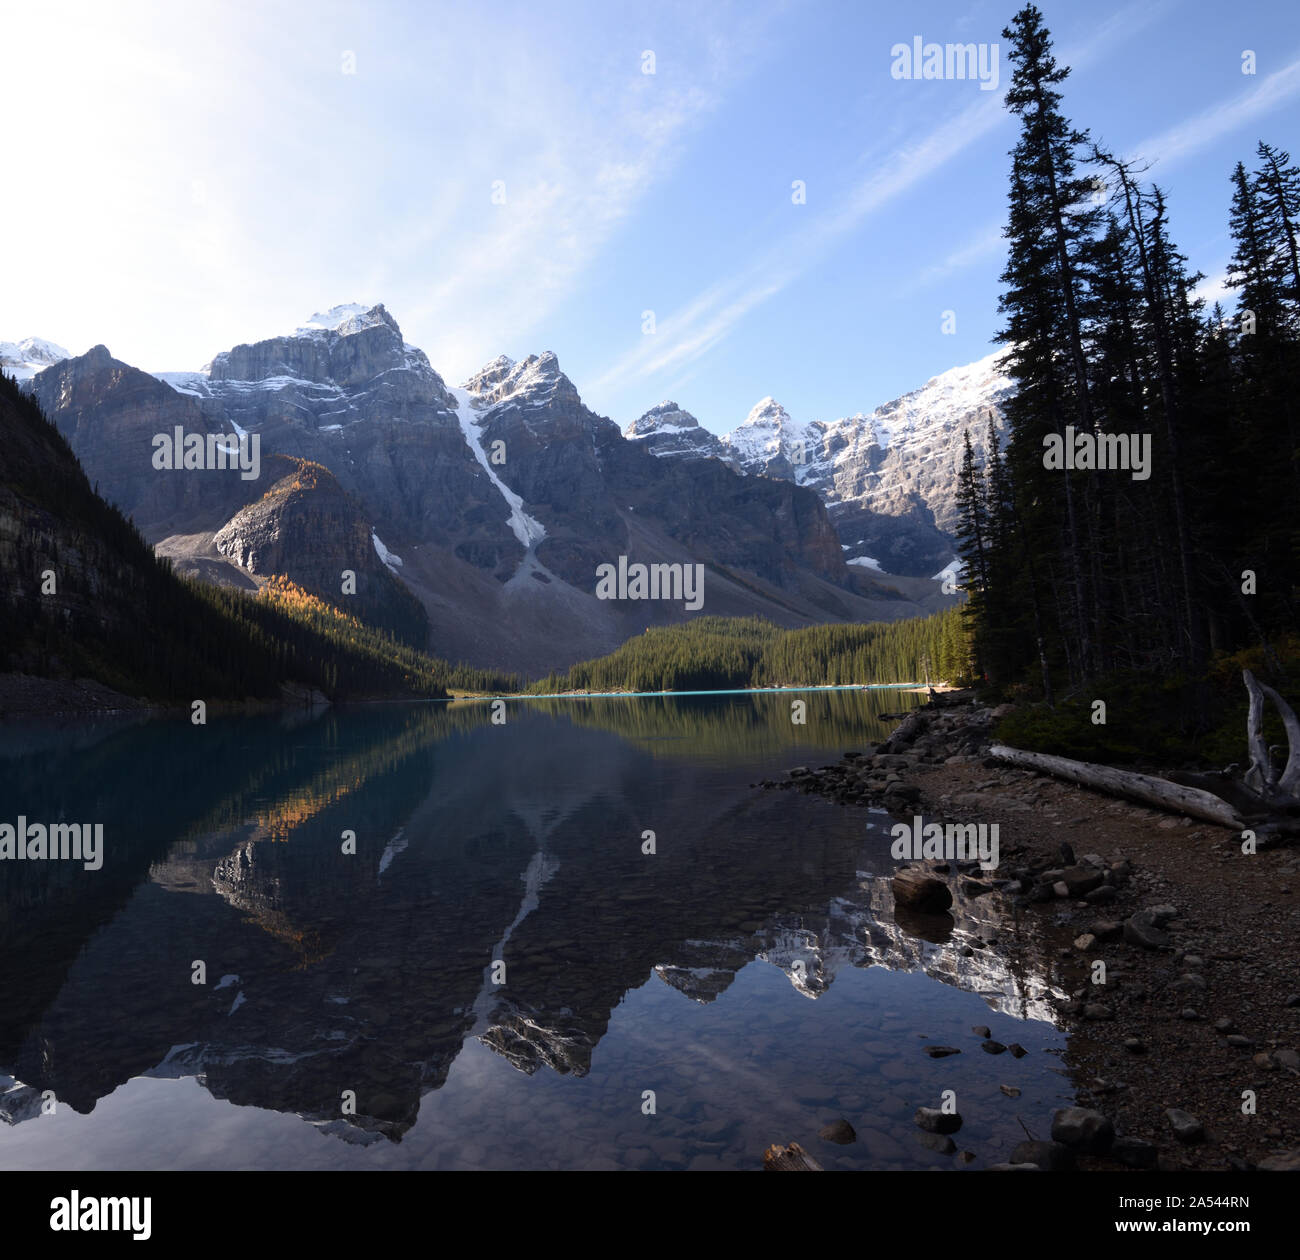 Conifers and mountains are reflected in the glacial waters of Moraine Lake. Moraine Lake, Banff National Park, Alberta, Canada. Stock Photo